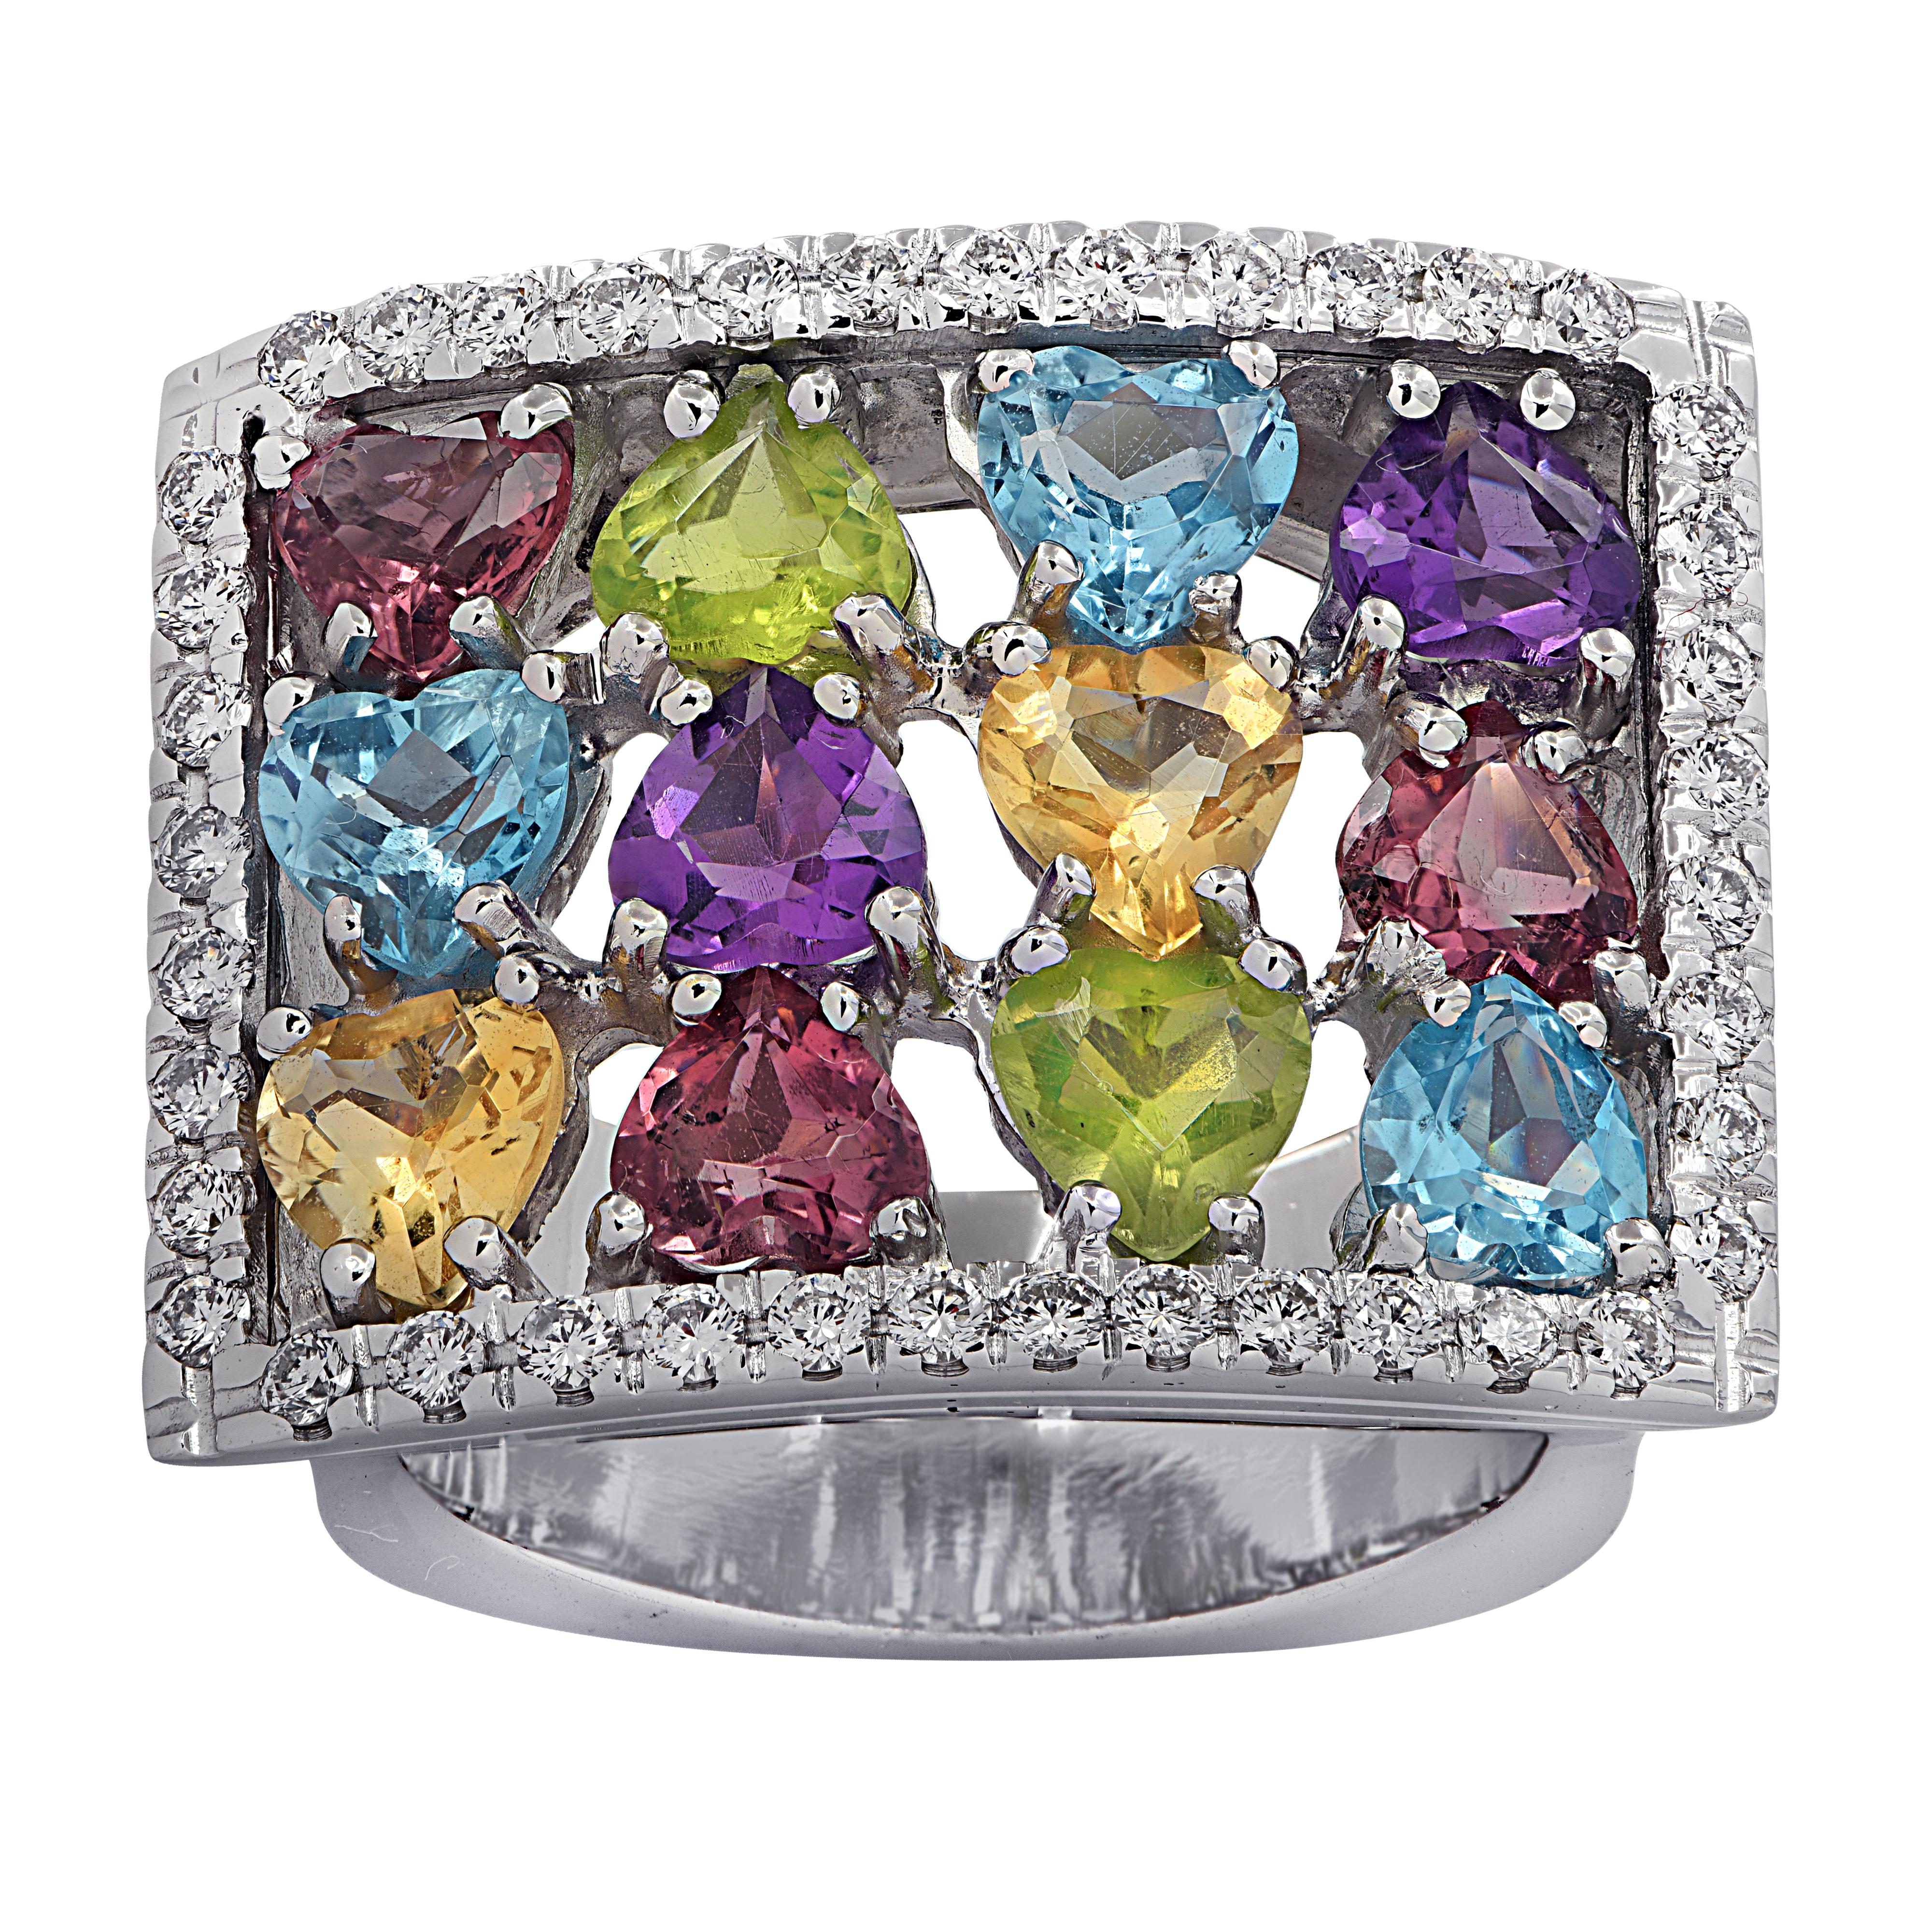 Delightful ring crafted in white gold featuring 12 heart shaped gemstones weighing approximately 5 carats total and 40 round brilliant cut diamonds weighing approximately 1 carat total, G color, VS clarity. This enchanting collection of Amethyst,